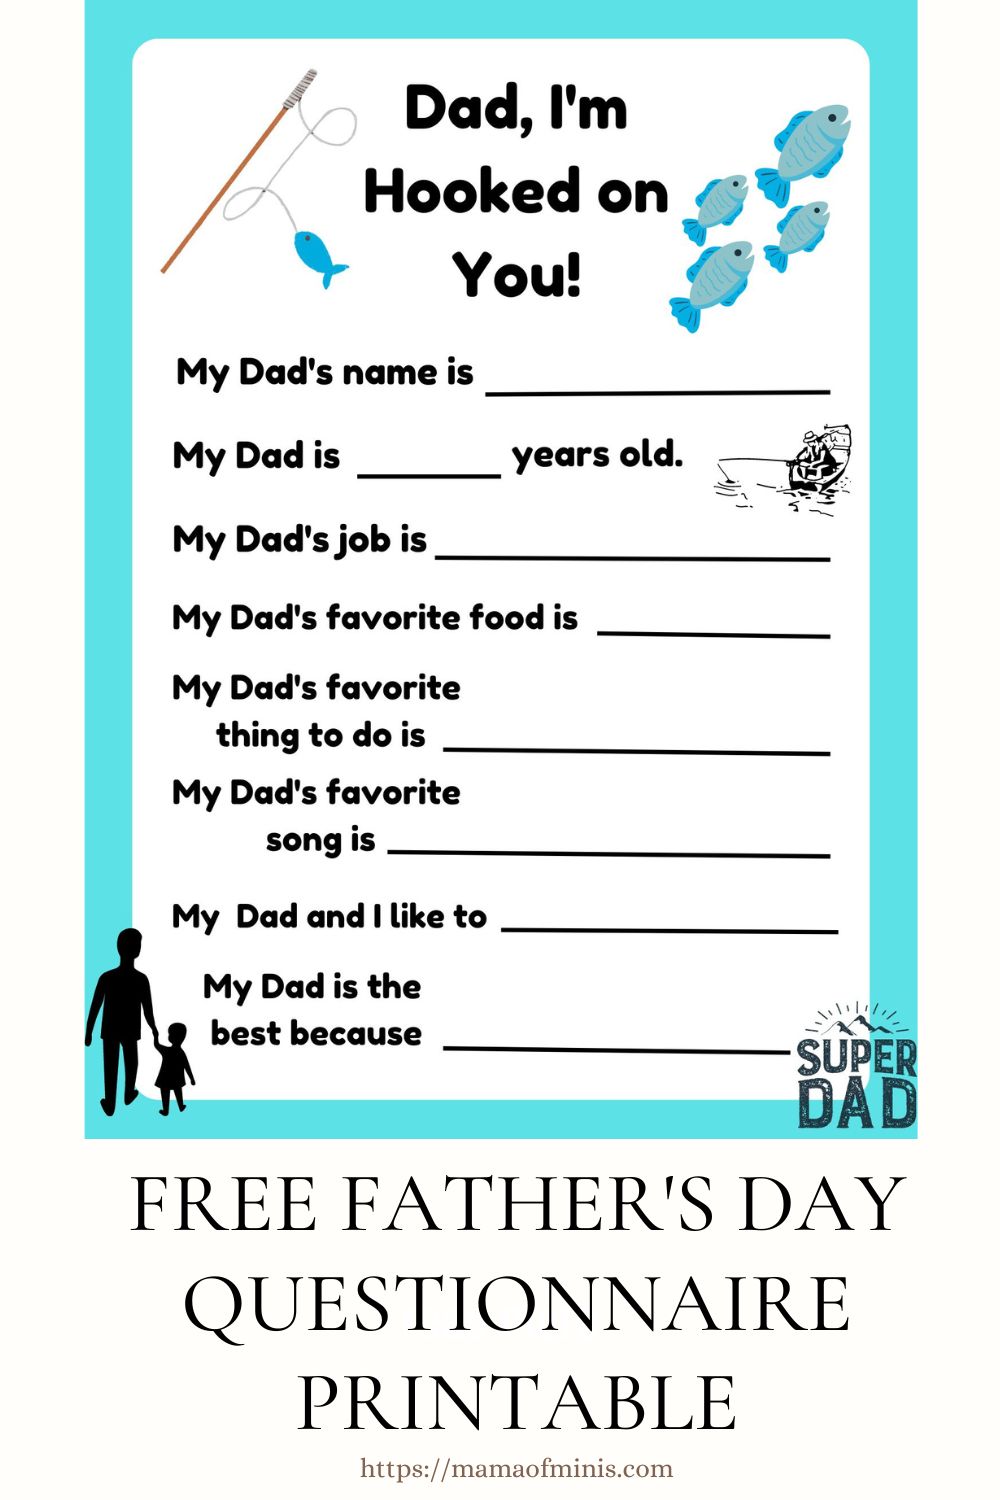 Free Father's Day Questionnaire Printable PDF